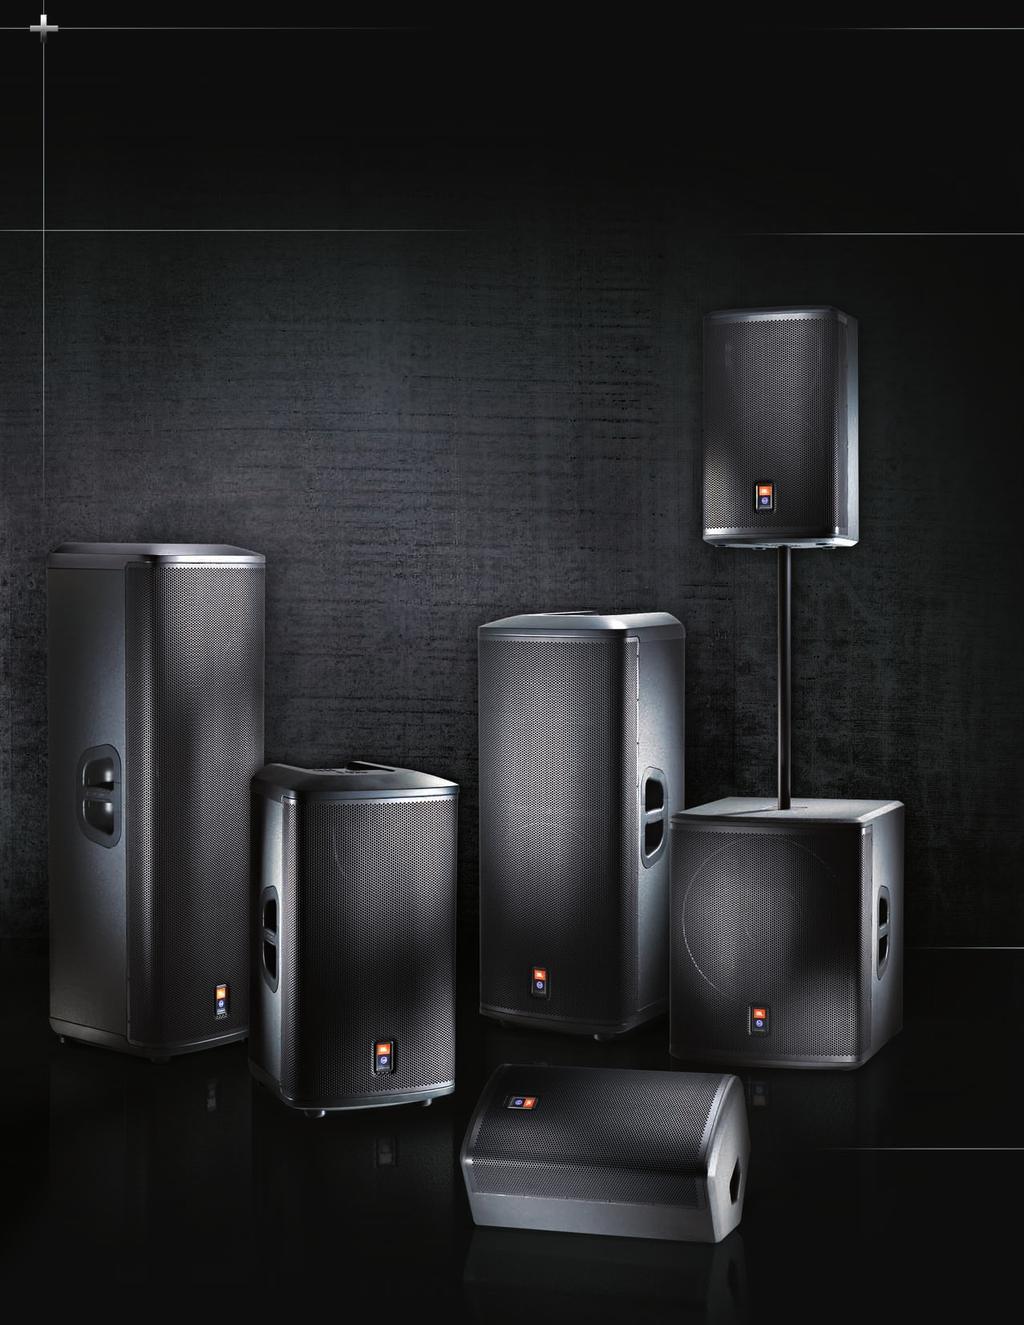 For every musician, DJ, venue and audio/video provider, high-performance self-powered speaker systems offer a degree of simplicity unmatched by traditional amp and speaker PA systems.